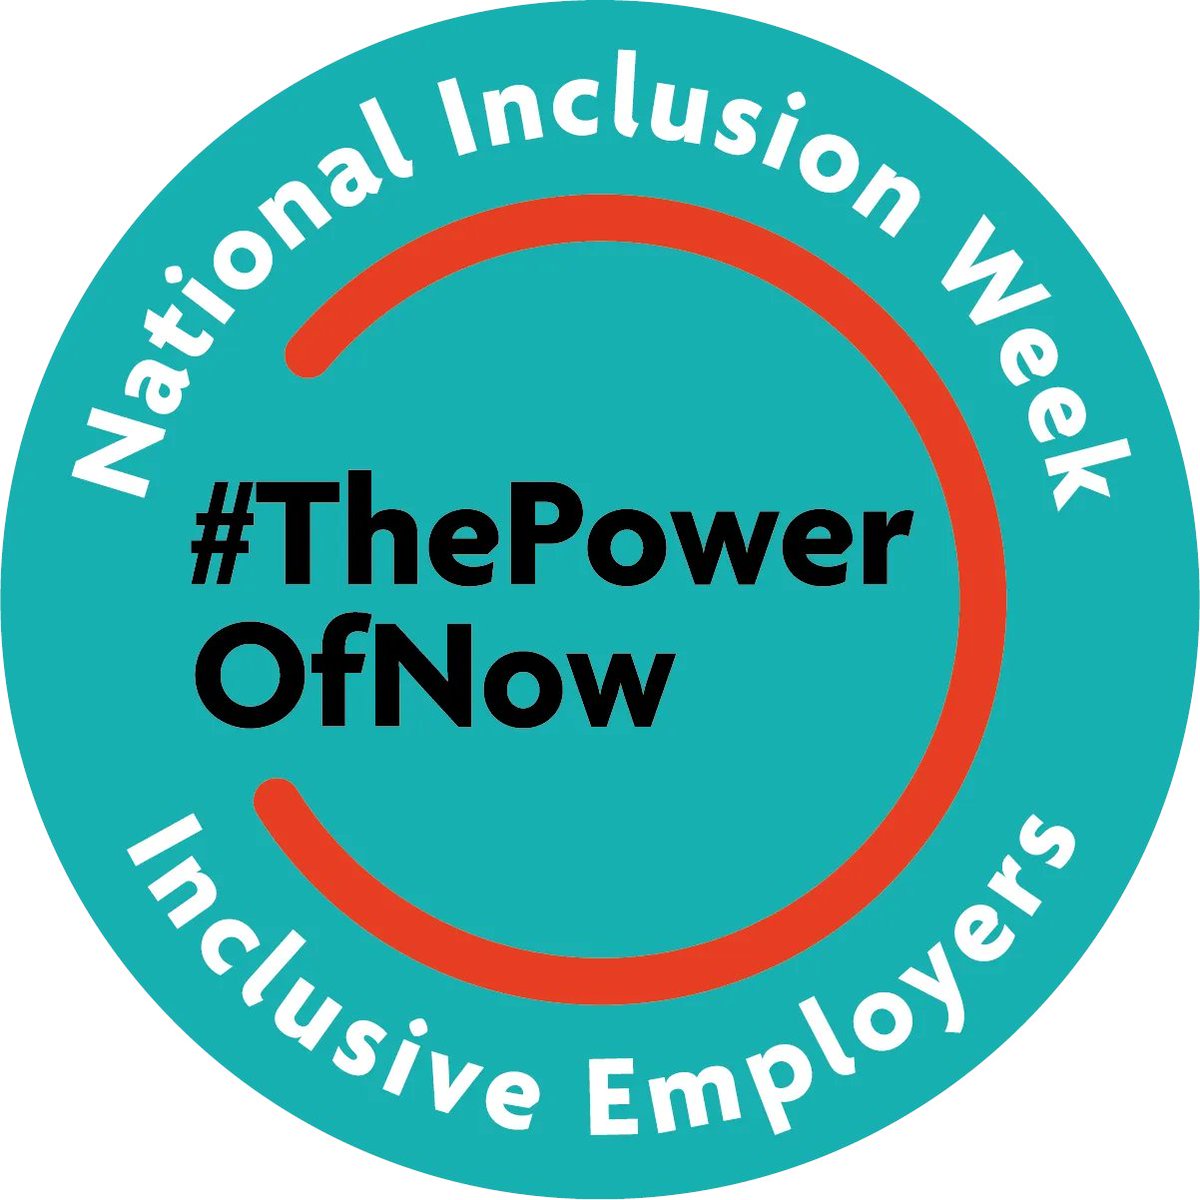 At 1000hrs We are looking past #NationalInclusionWeek with a discussion on our @MerpolFORE Network and the Police Race Action Plan @CollegeofPolice @IncEmp @PoliceChiefs #ThePowerOfNow